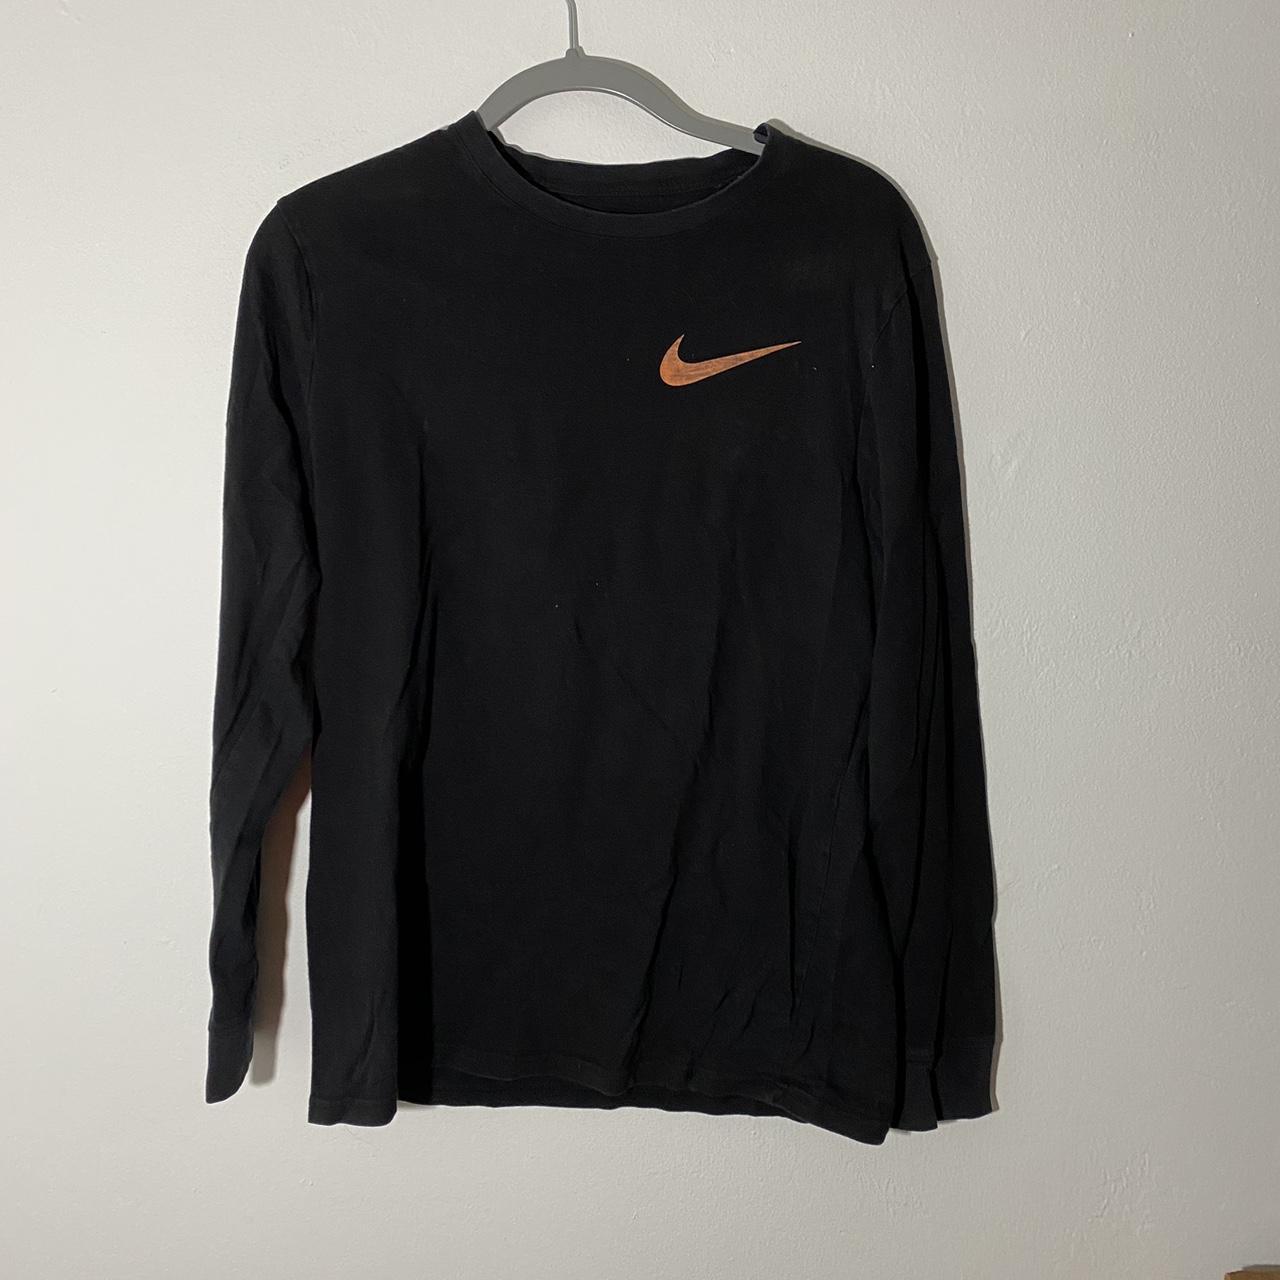 Vlone x Nike collab l/s, Medium , Has some wear but...